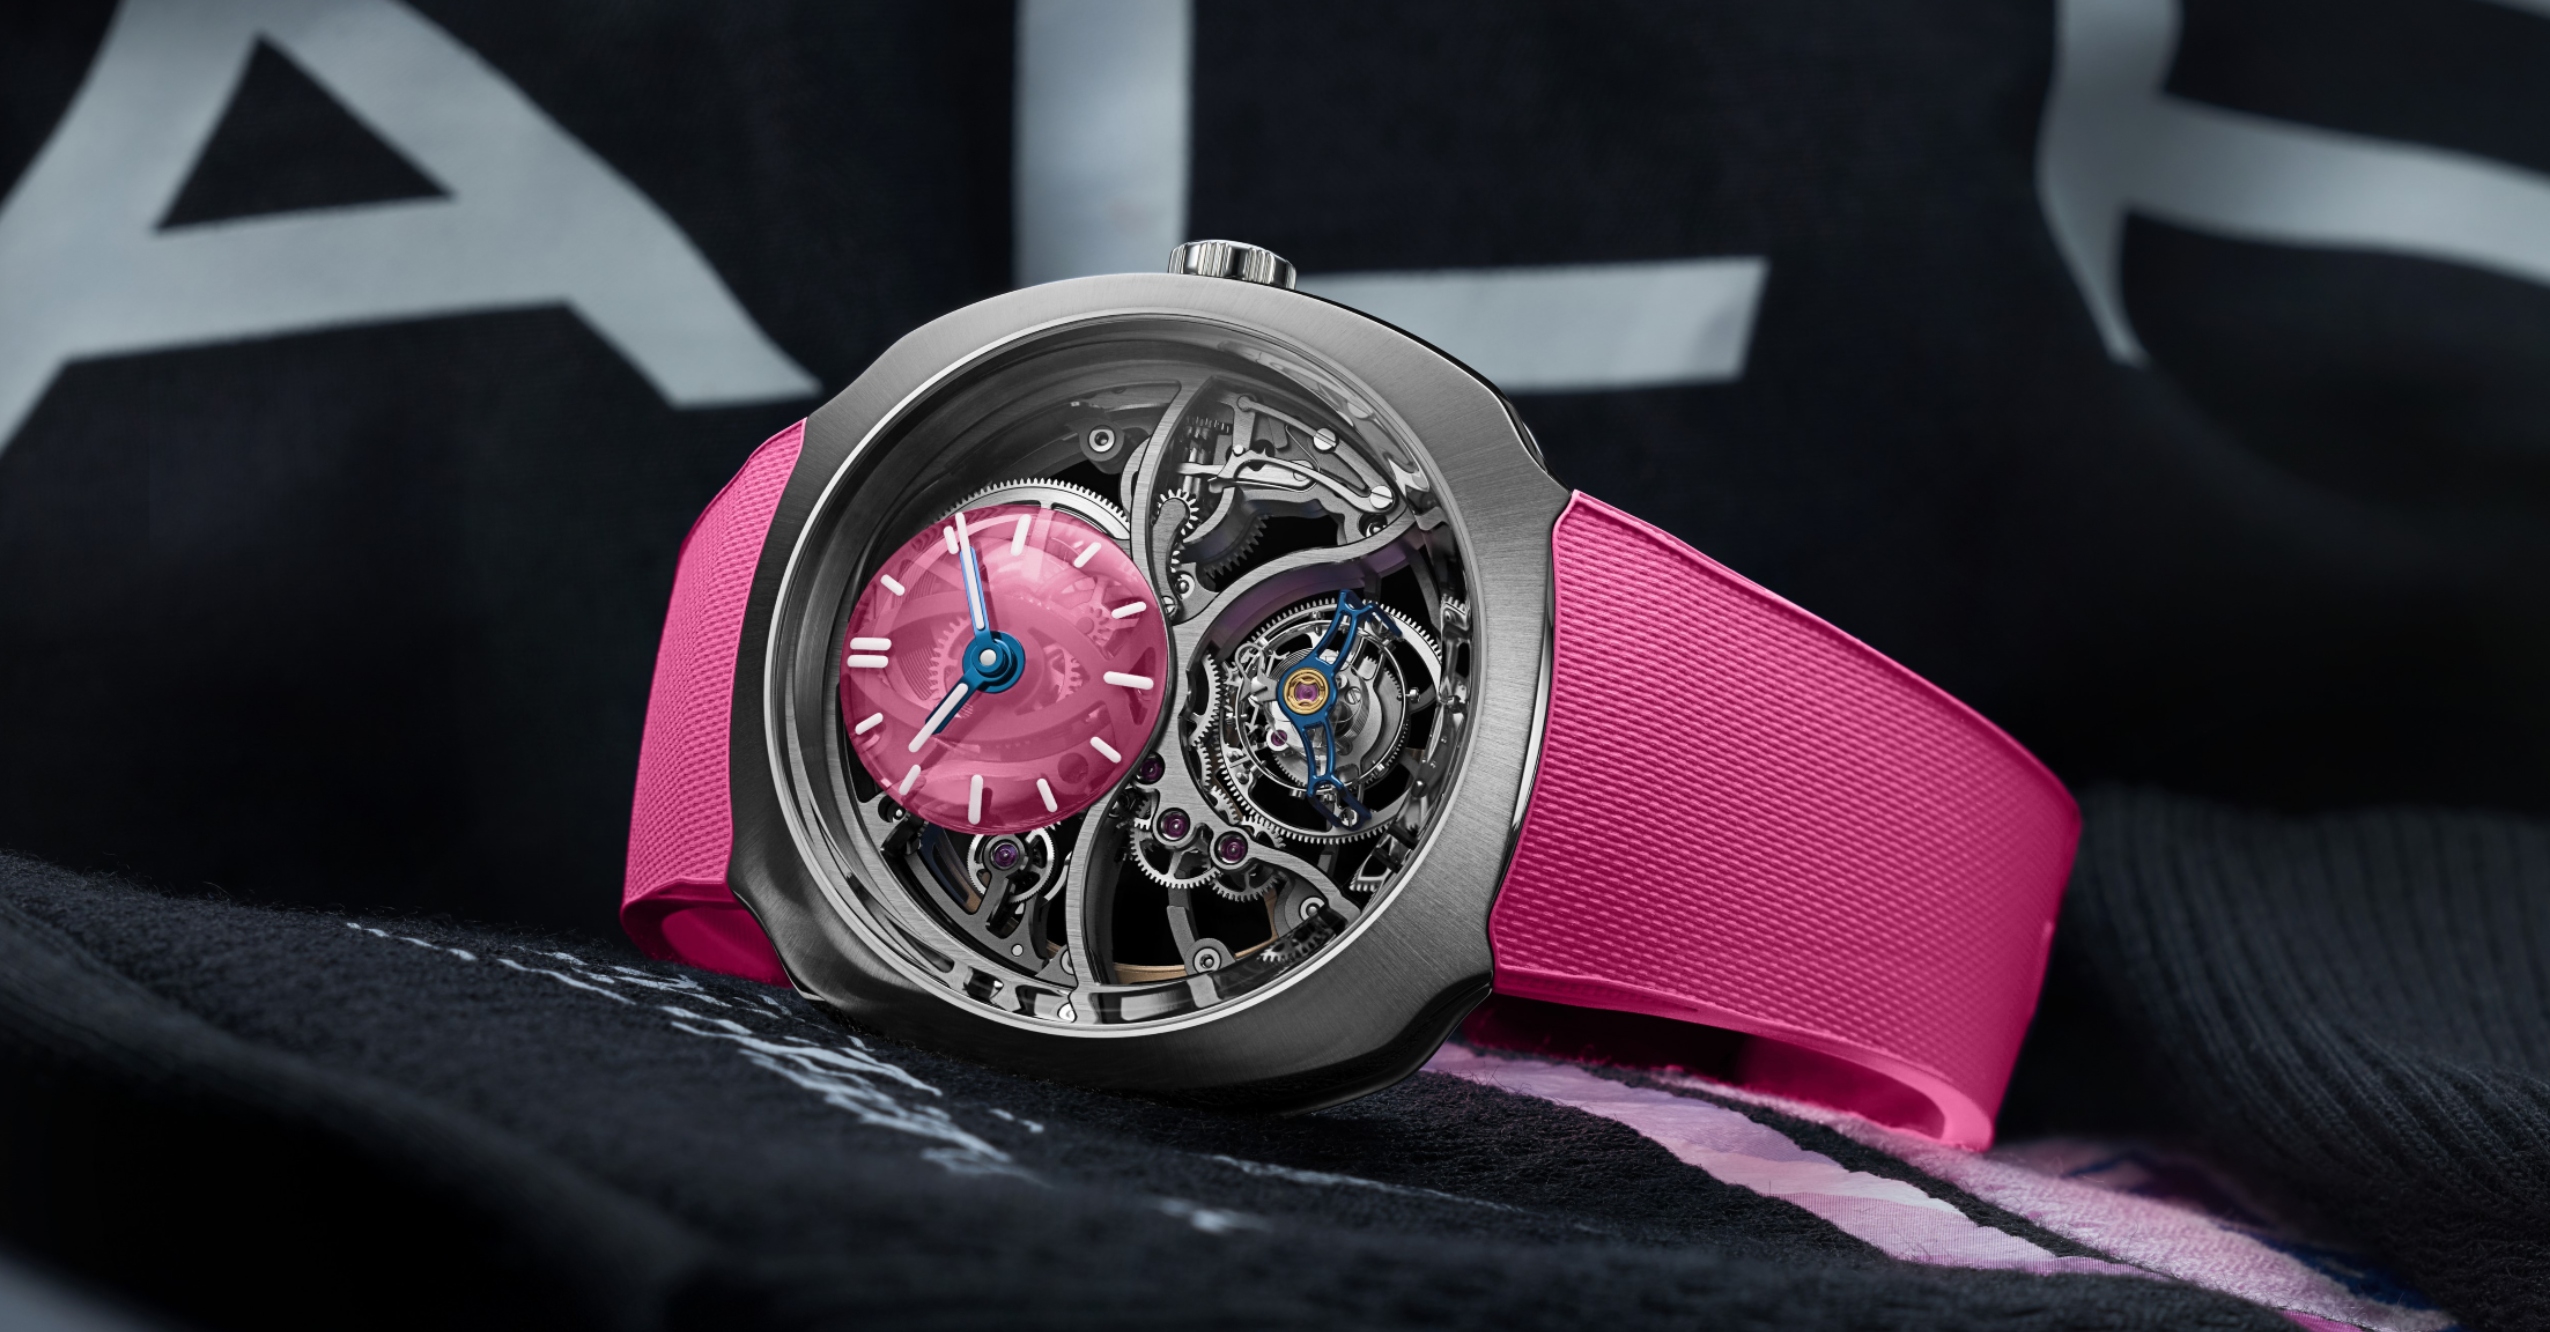 H. Moser Goes Full-Throttle With Pink Formula 1 Skeleton Watch